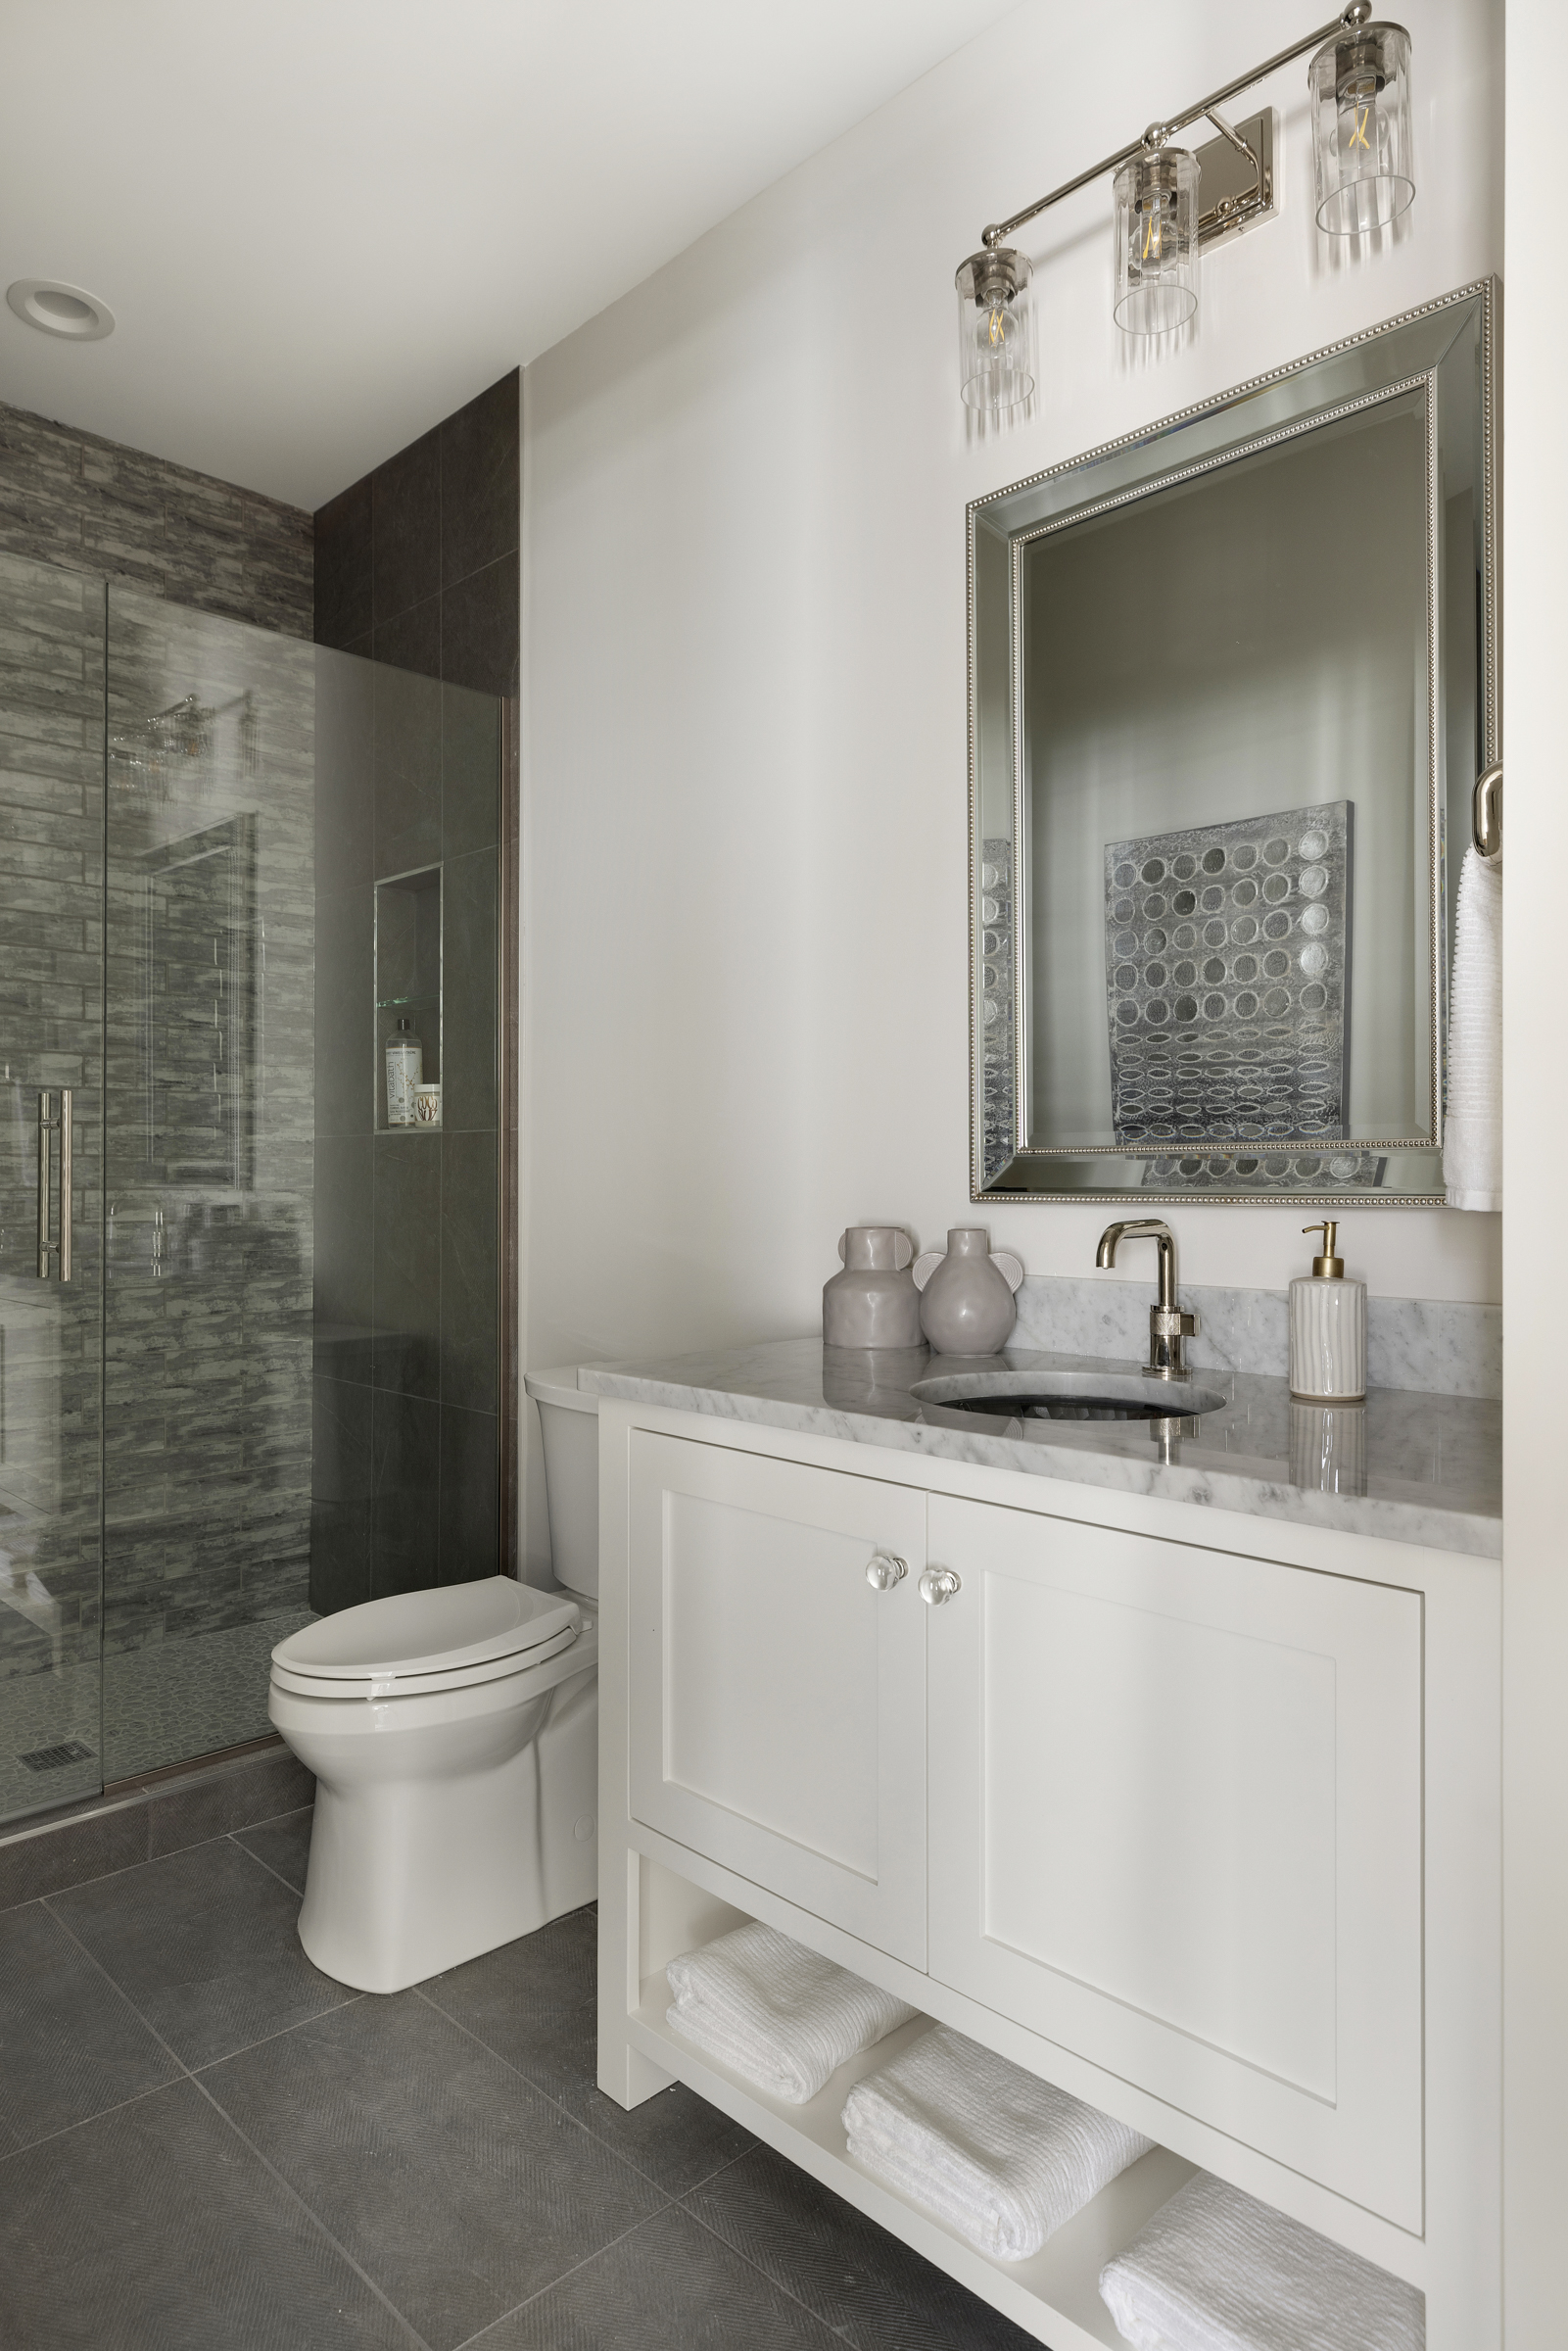 a bathroom with white walls, a glass shower on the left wall, a toilet in the middle, a white vanity on the right side with a sink and a mirror, and grey stone floors